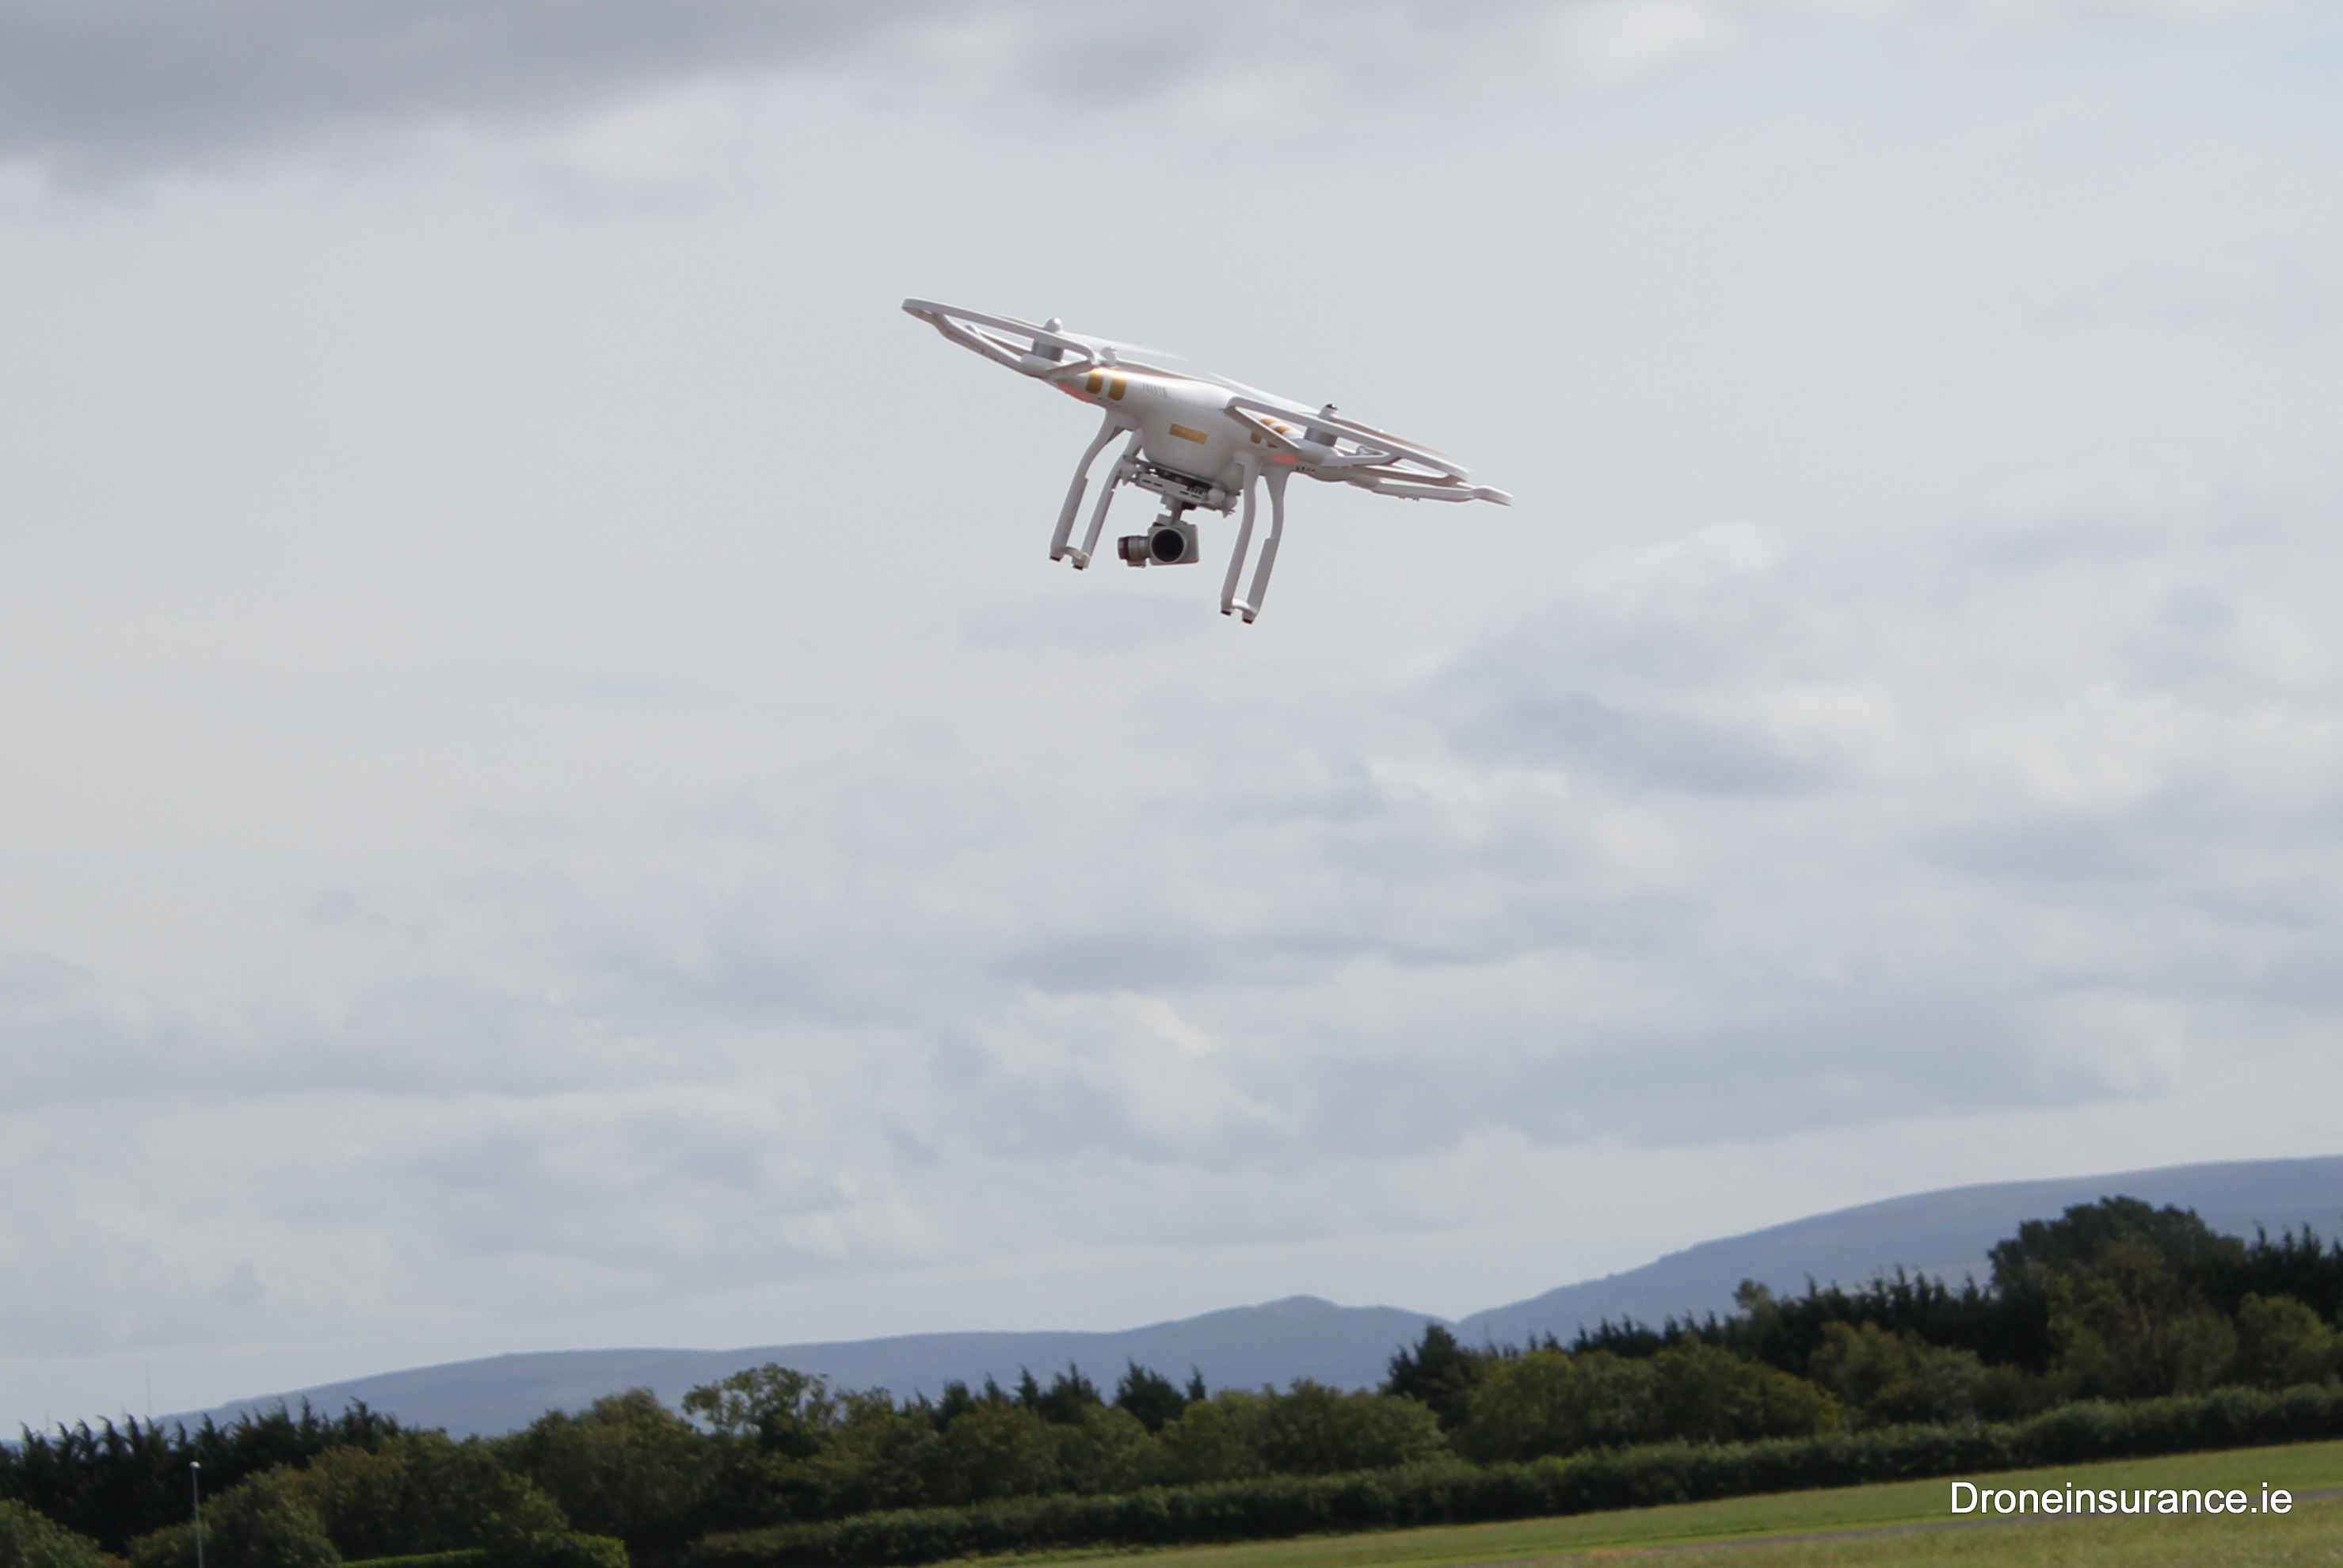 DroneInsurance.ie At The Unmanned Aircraft Association Of Ireland Open Day